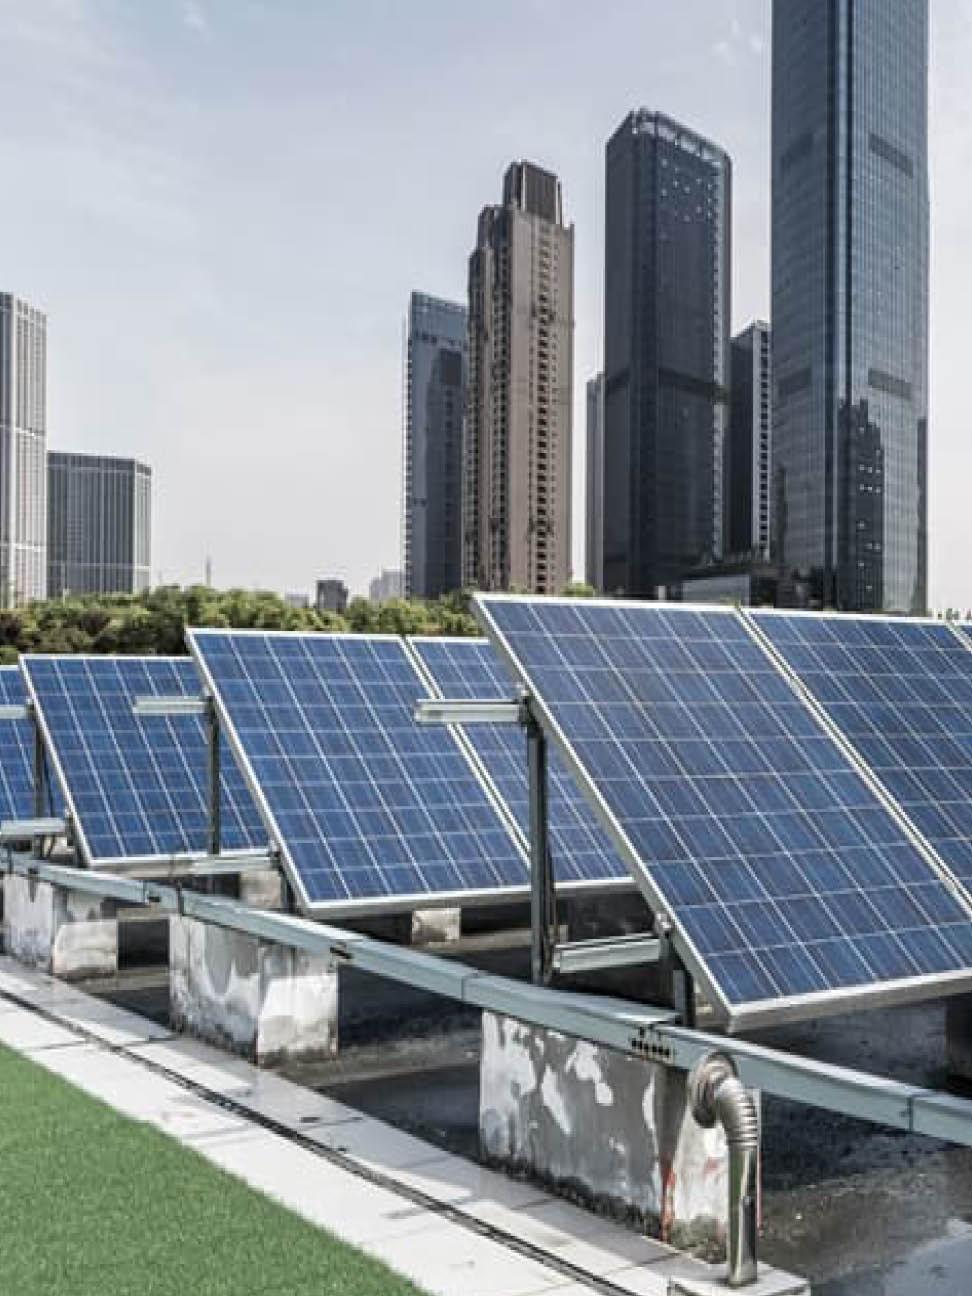 A row of tilted solar panels, a city-scape behind them